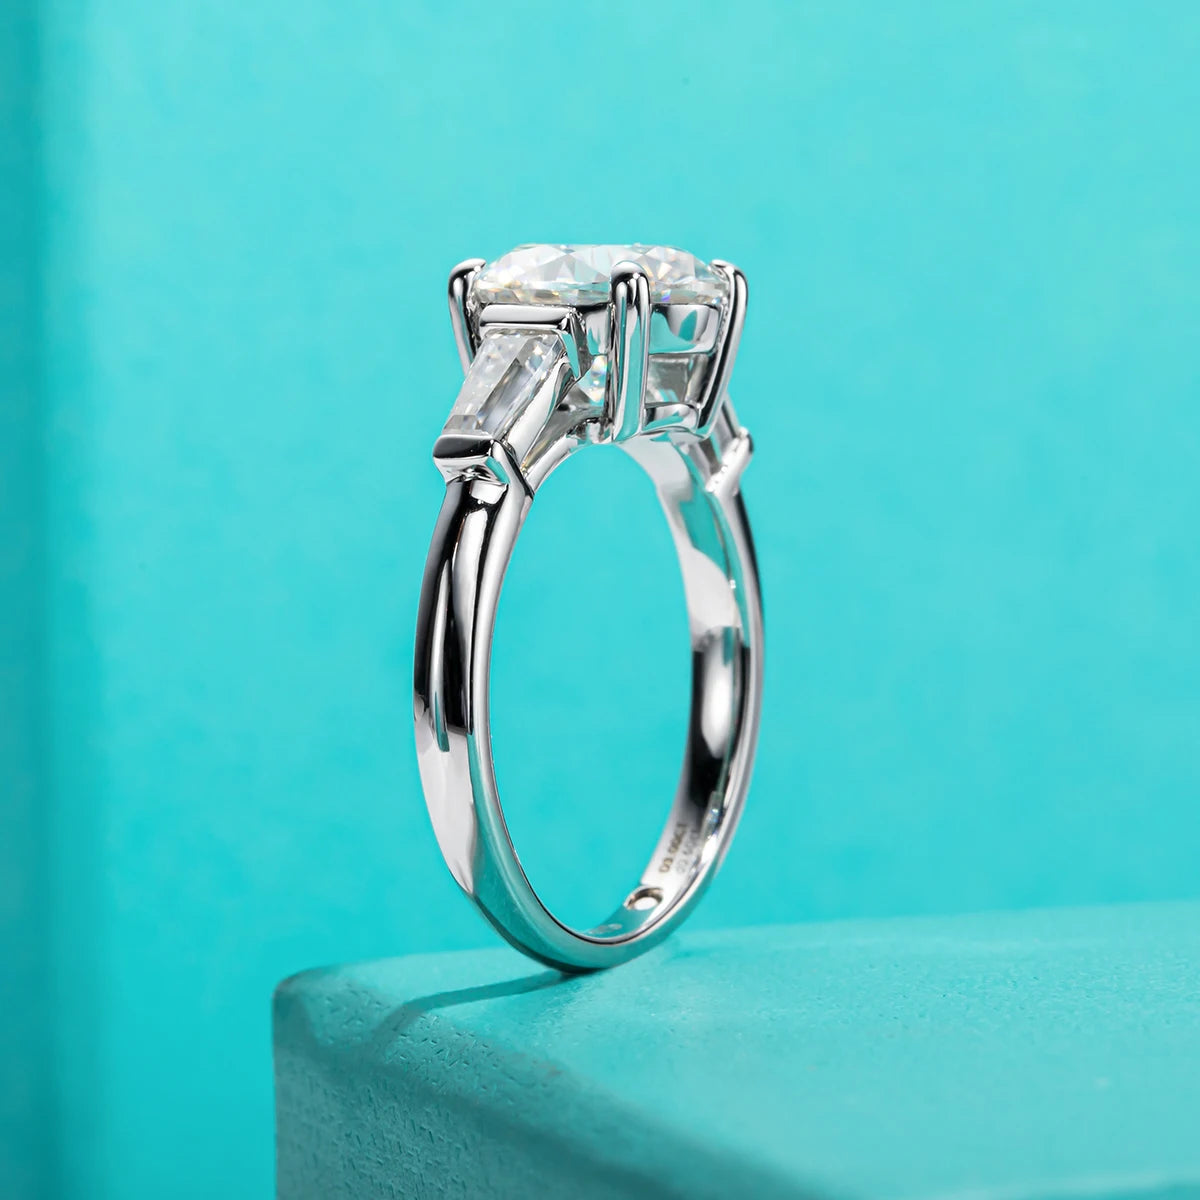 Moissanite engagement wedding ring: Chic, Affordable Wedding Choices